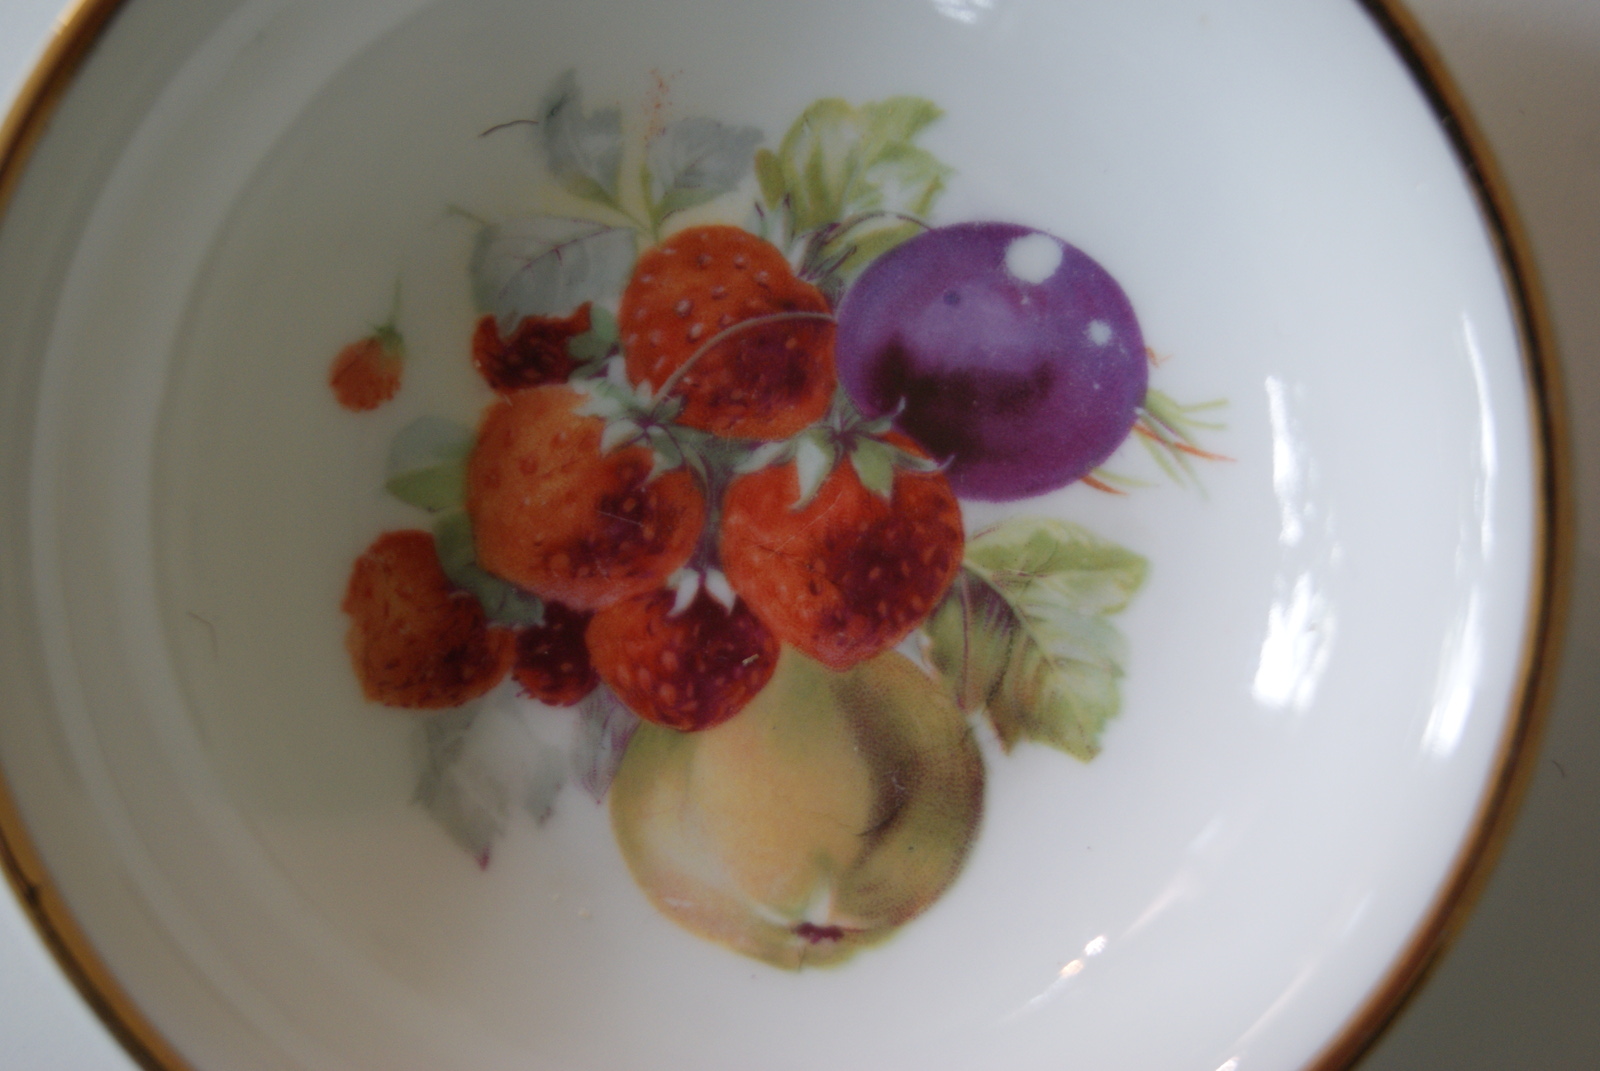 Porsgrund bowl with fruits - plums, pears and strawberries